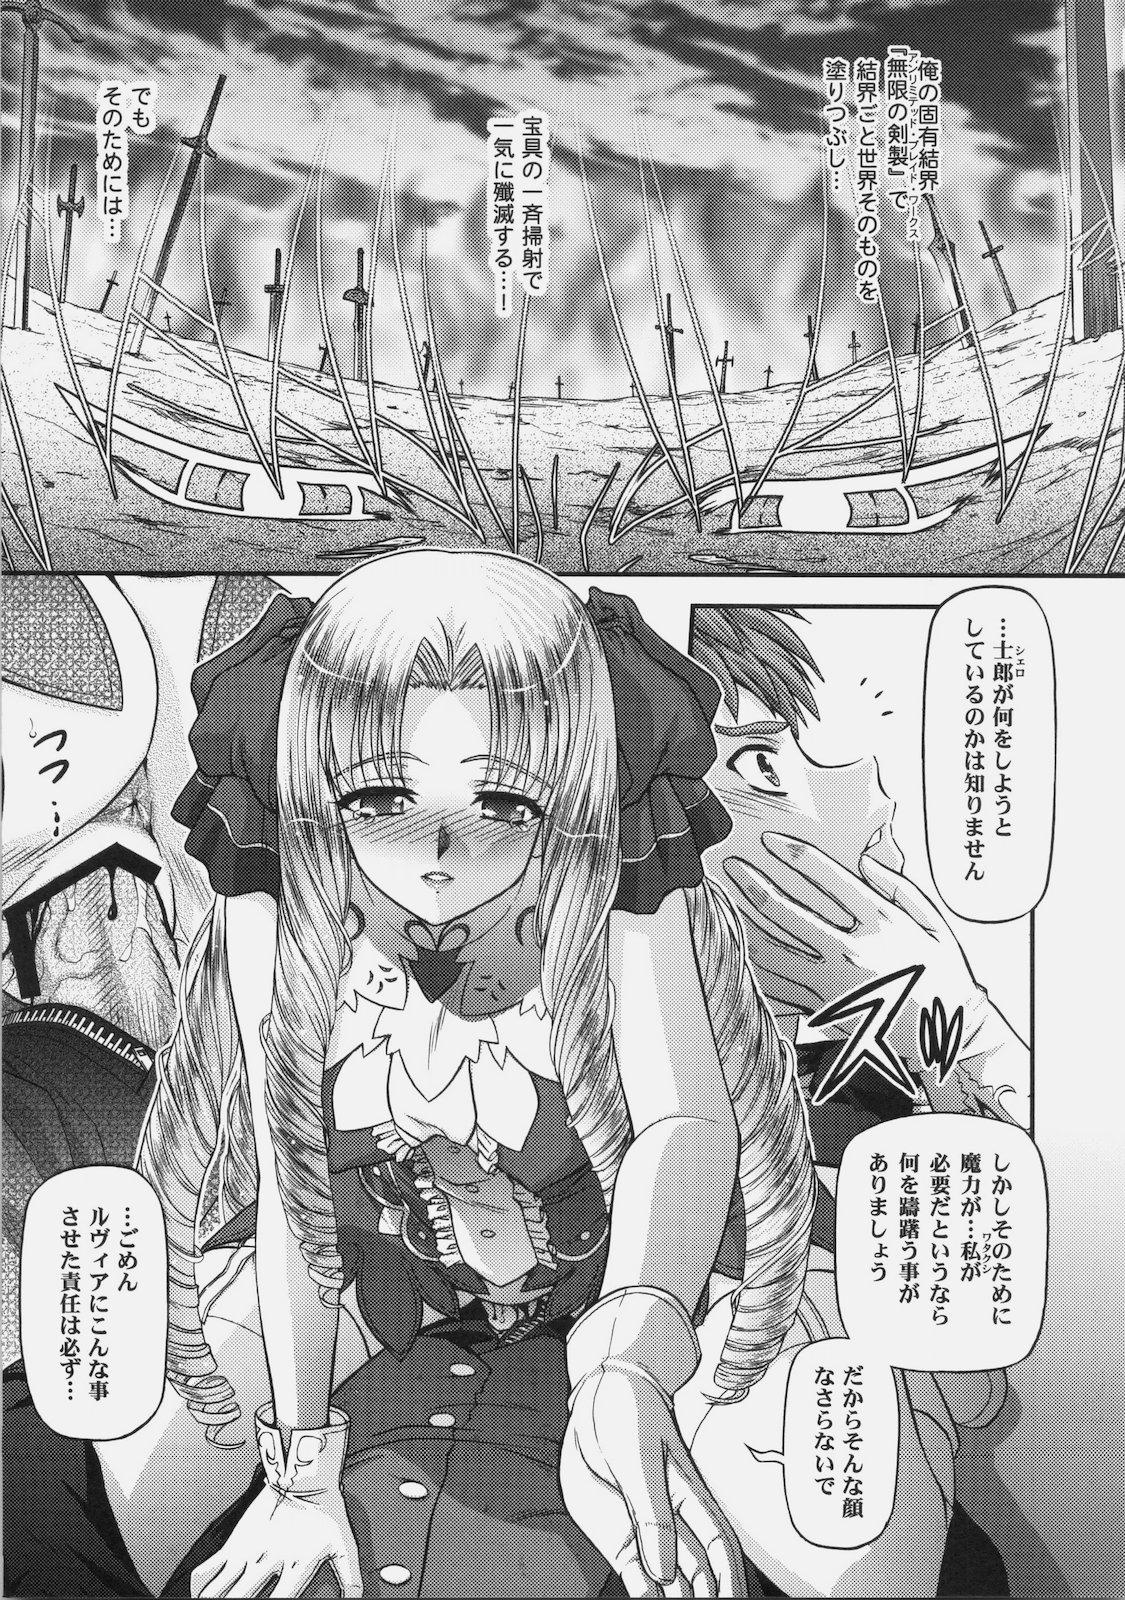 Gay Trimmed BLUE BLOOD'S vol.26 - Fate hollow ataraxia Stepsister - Page 9